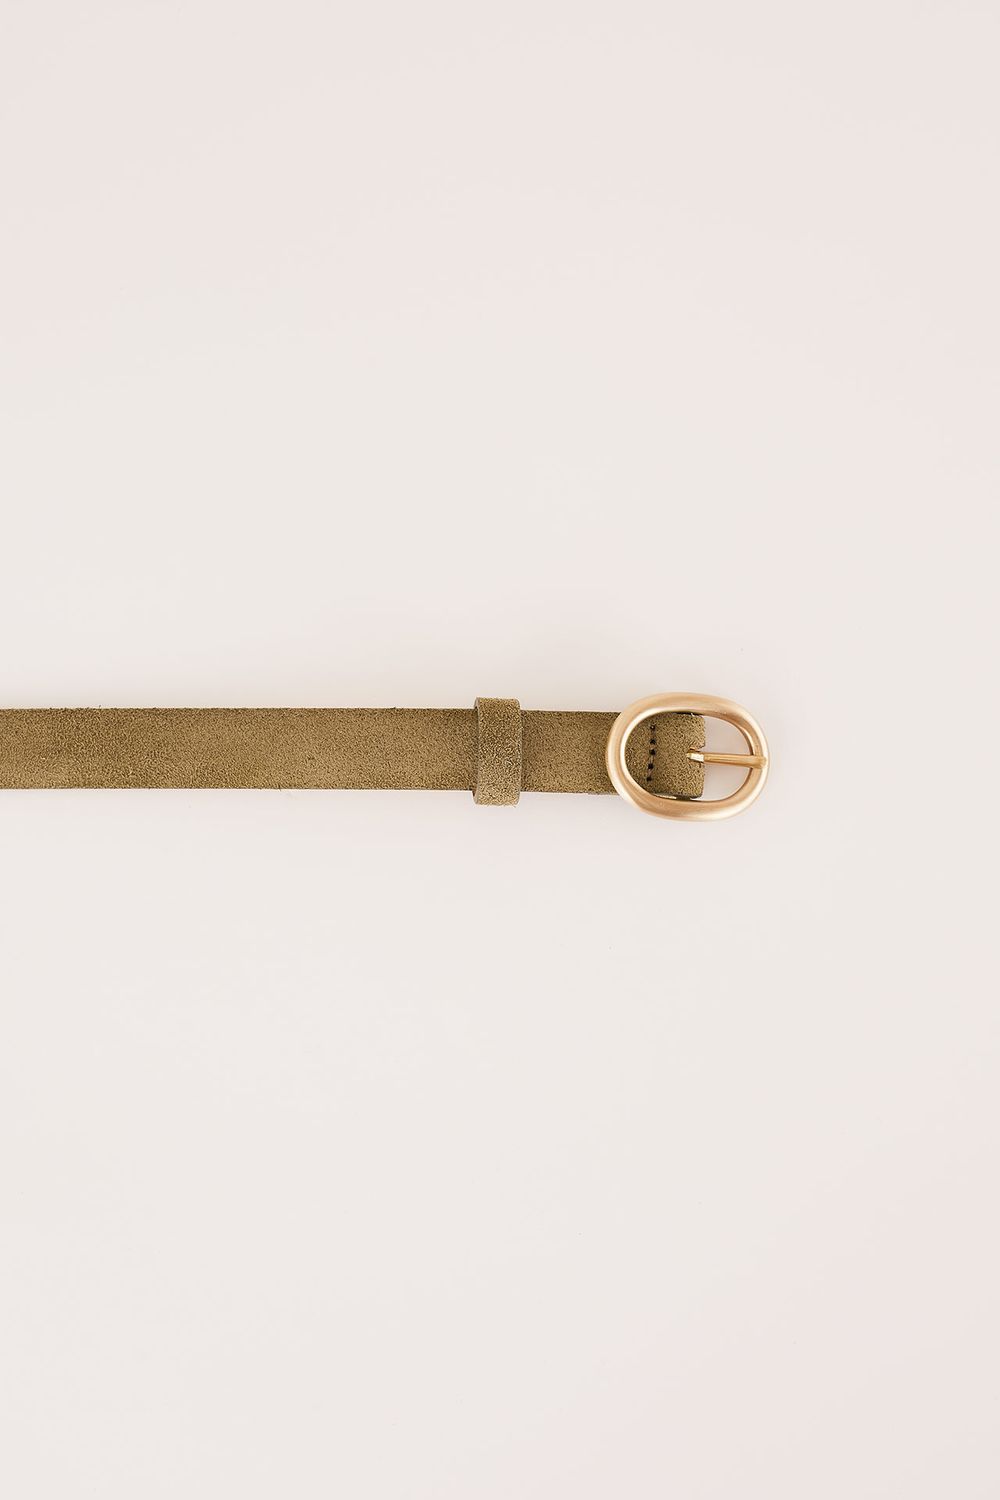 Thin leather belt with gold oval buckle